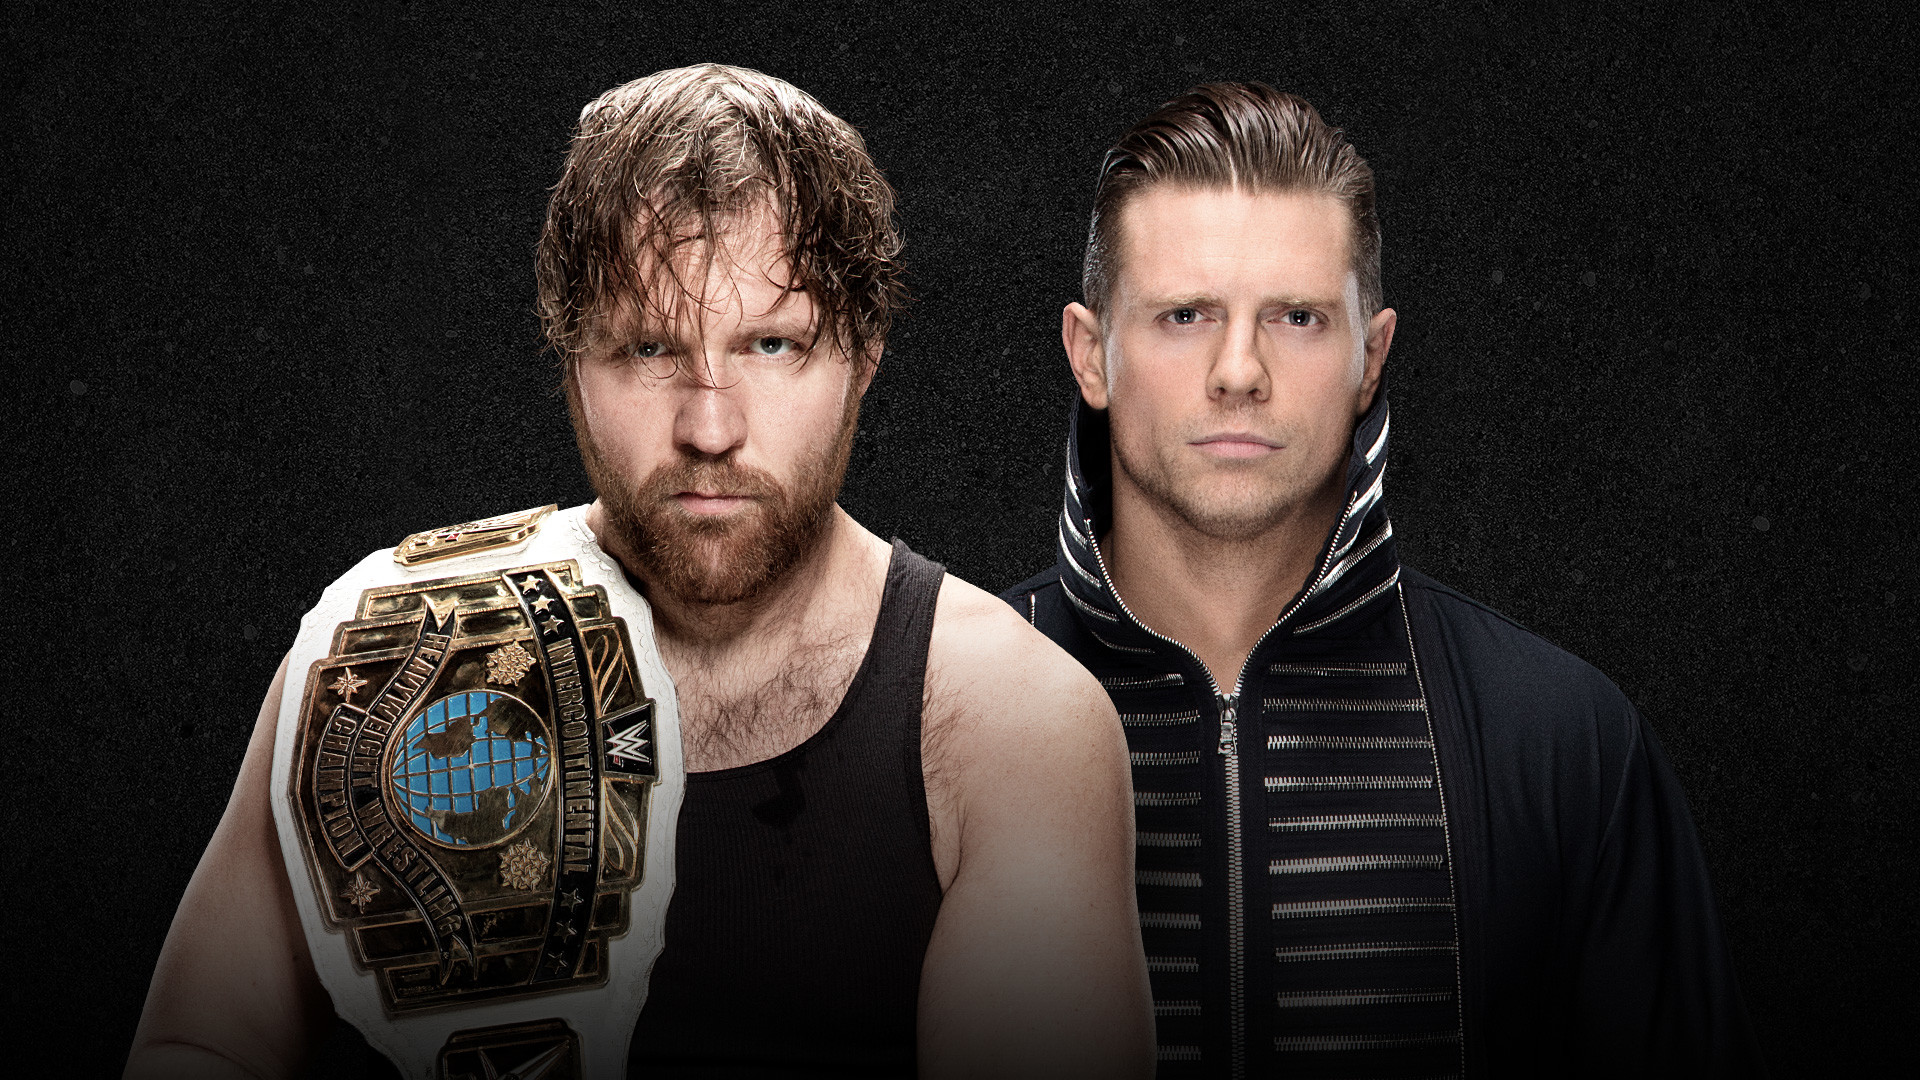 1920x1080 Dean Ambrose retained the Intercontinental Title against The Miz after a  disqualification ruling on the May 15 edition of Monday Night Raw.